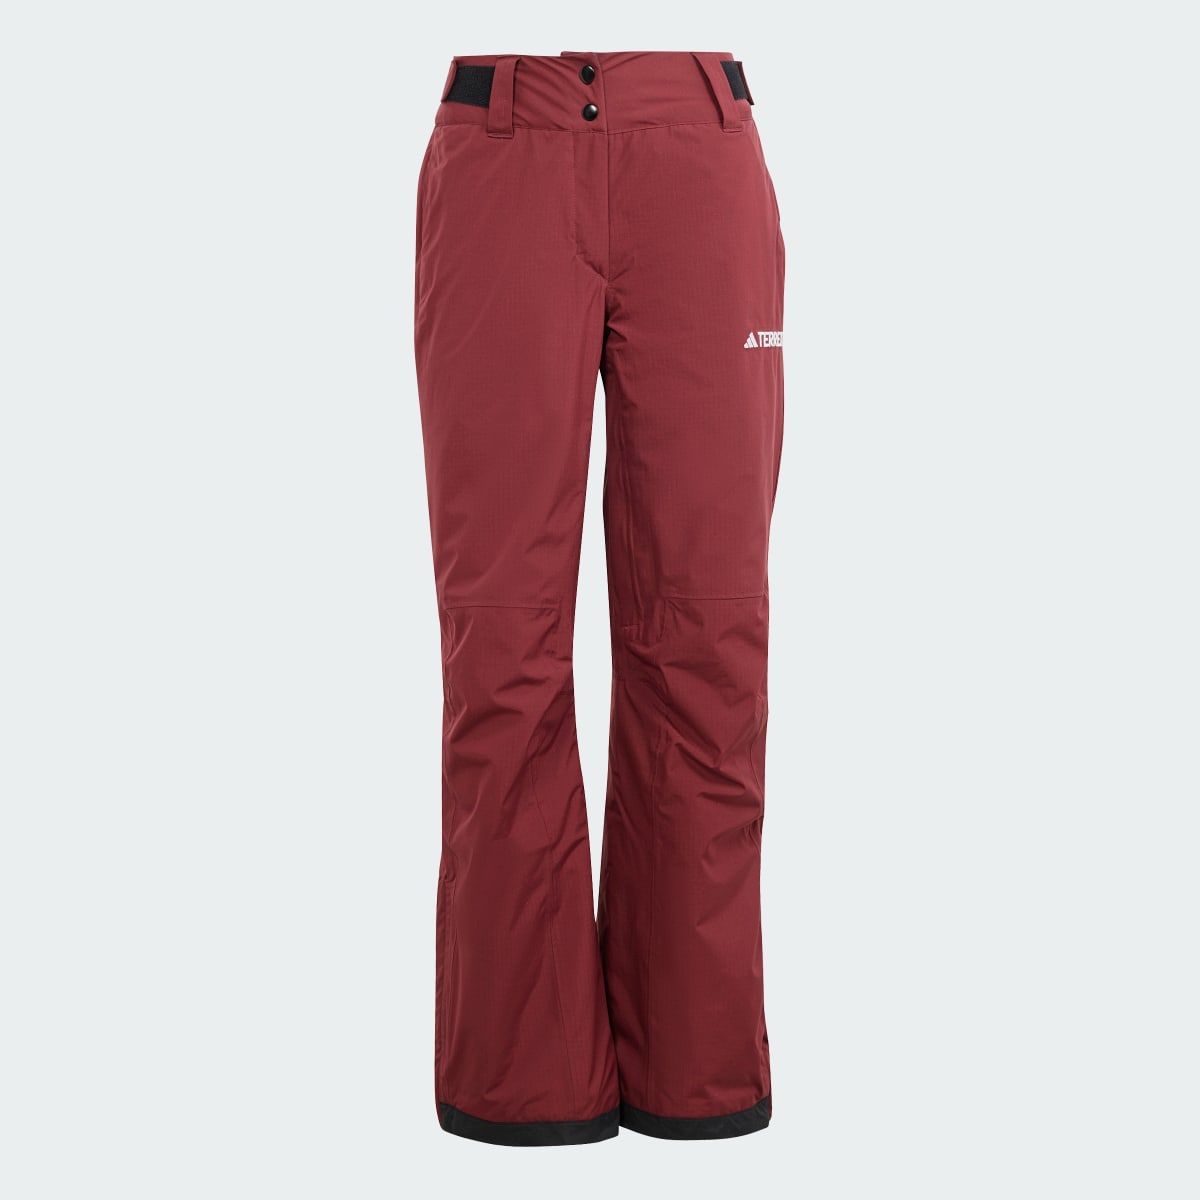 Adidas Terrex Xperior 2L Insulated Pants. 4